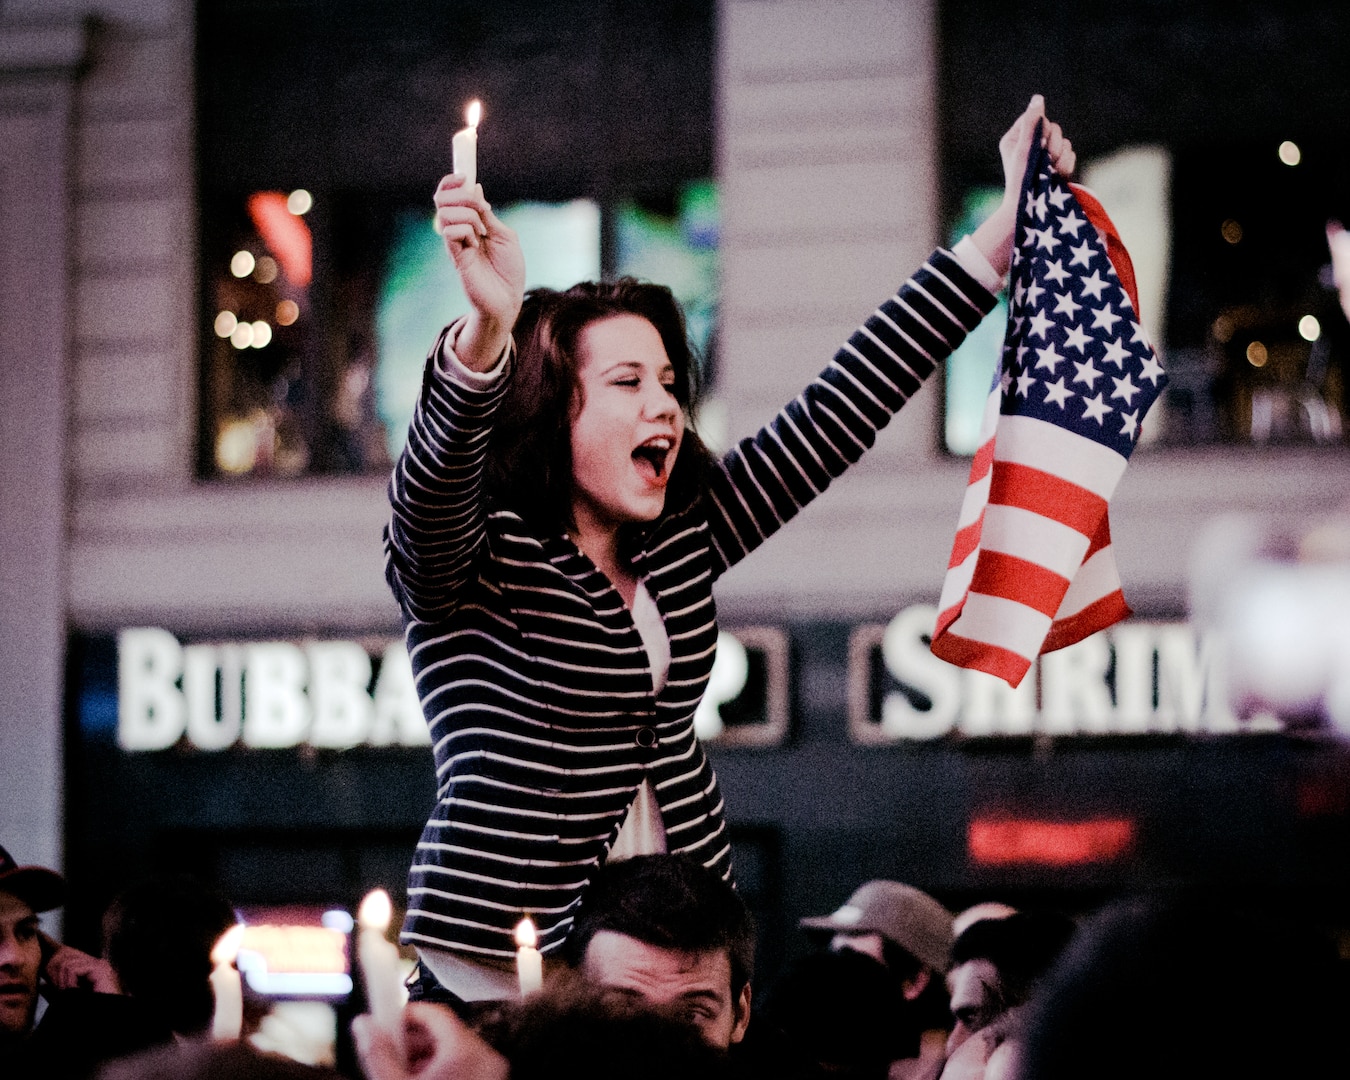 Celebrations in Times Square after death of Osama bin Laden, May 2, 2011 (Courtesy John Pesavento)